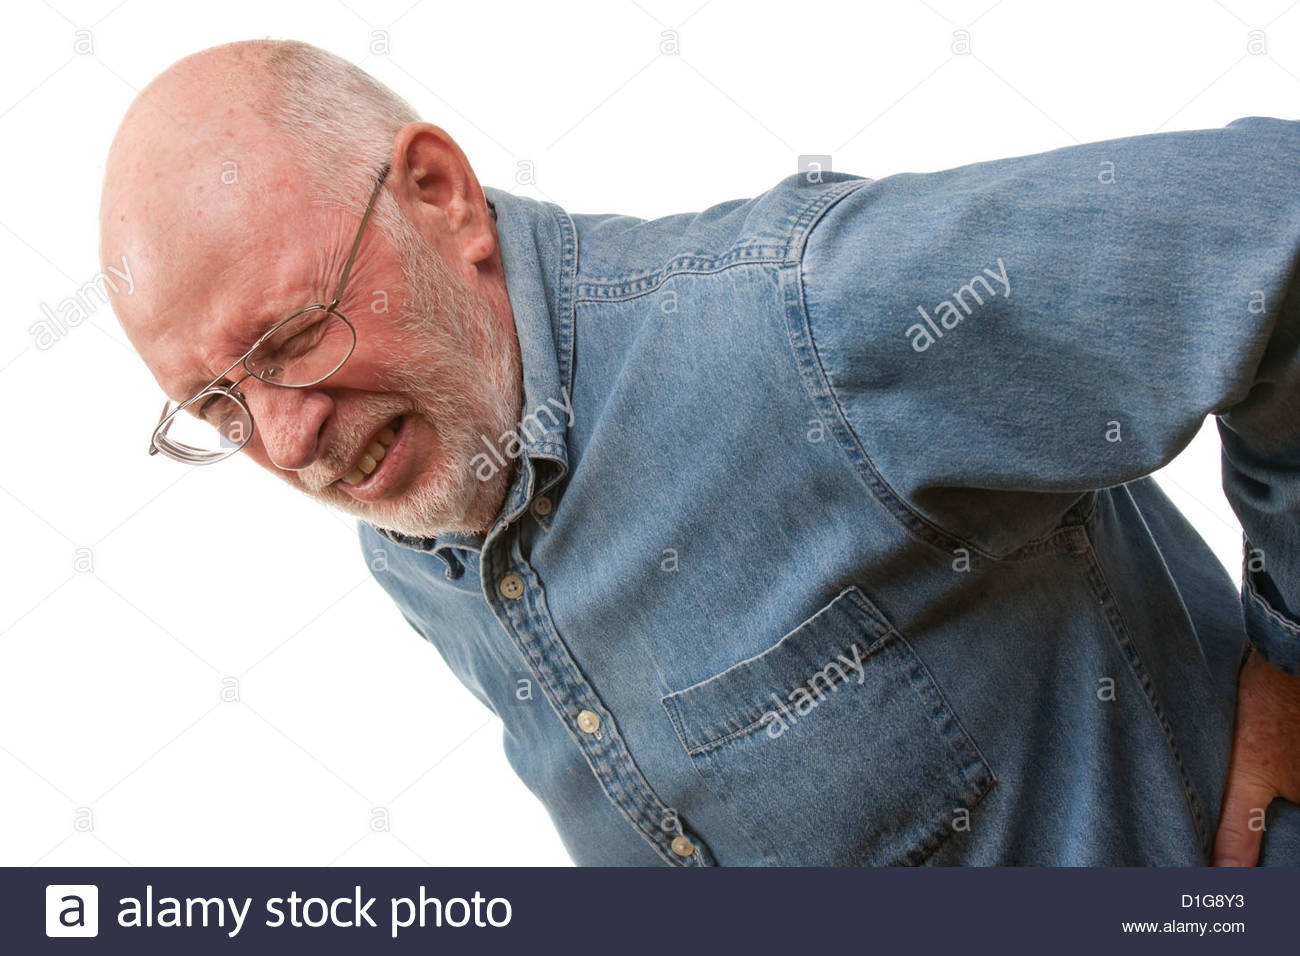 Agonizing Senior Man with Hurting Back on a White Background.